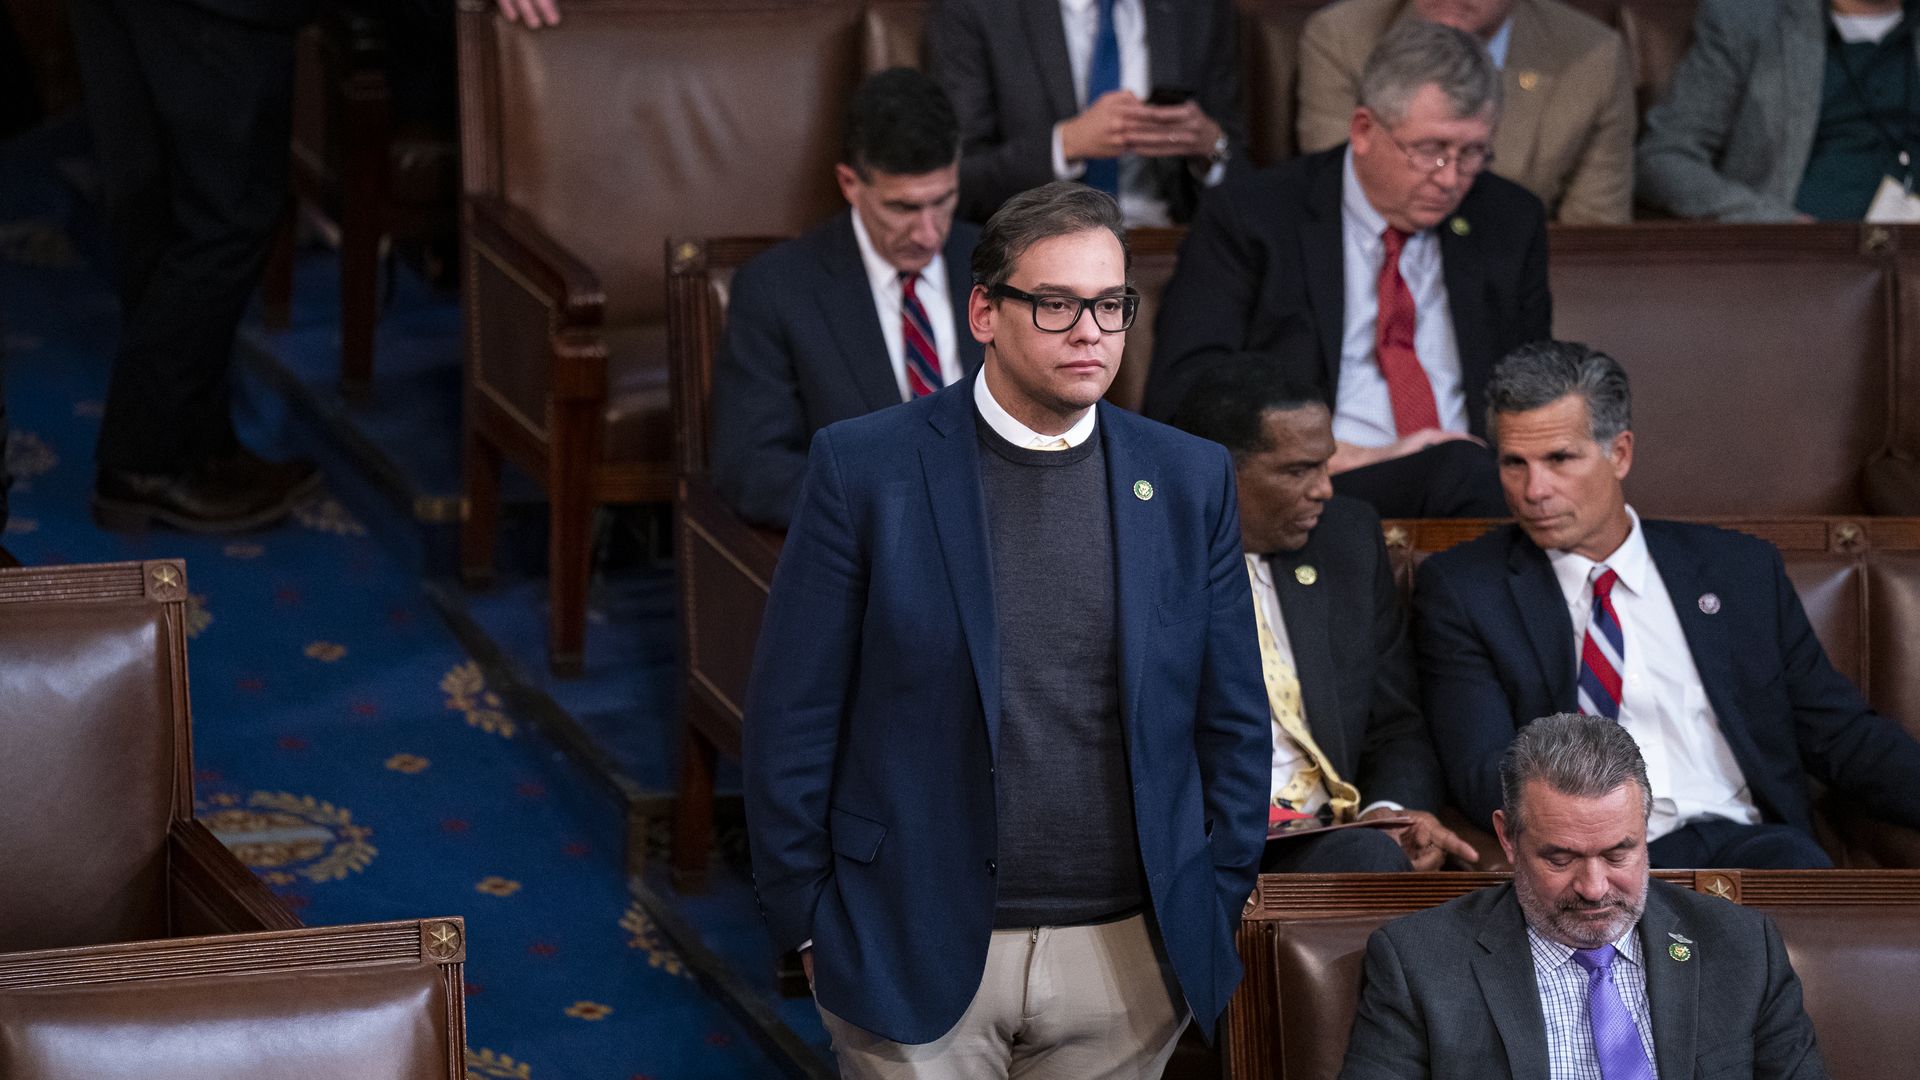 Rep. George Santos, wearing glasses, a gray suit over a white shirt and a blue suit jacket, stands on the Republican side of the House chamber.